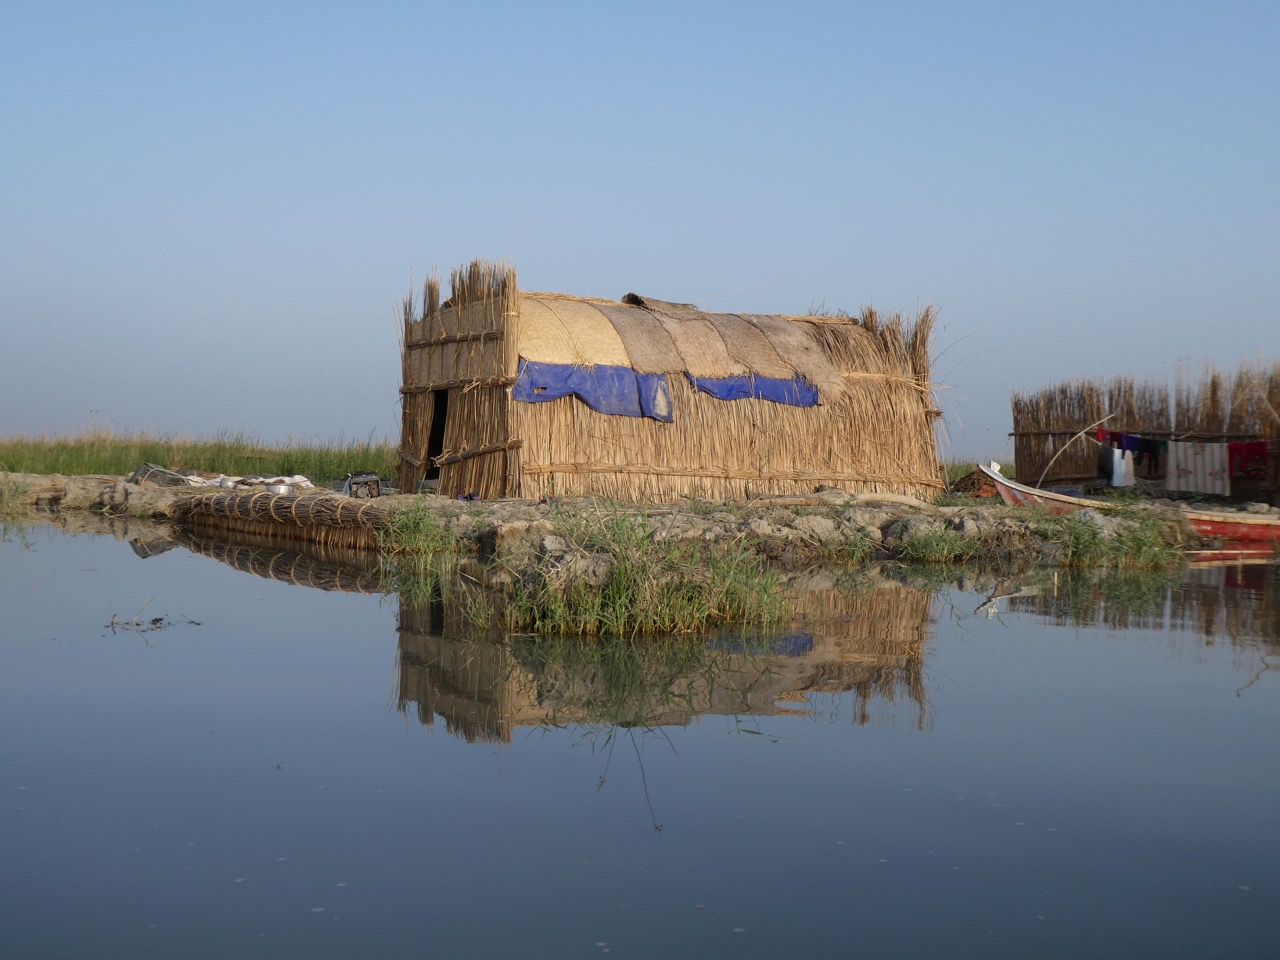 A traditional Marsh Arab home, built in the same style used by the ancient Sumerians. It floats atop the Mesopotamian Marshes. Photo by Erica Gies.